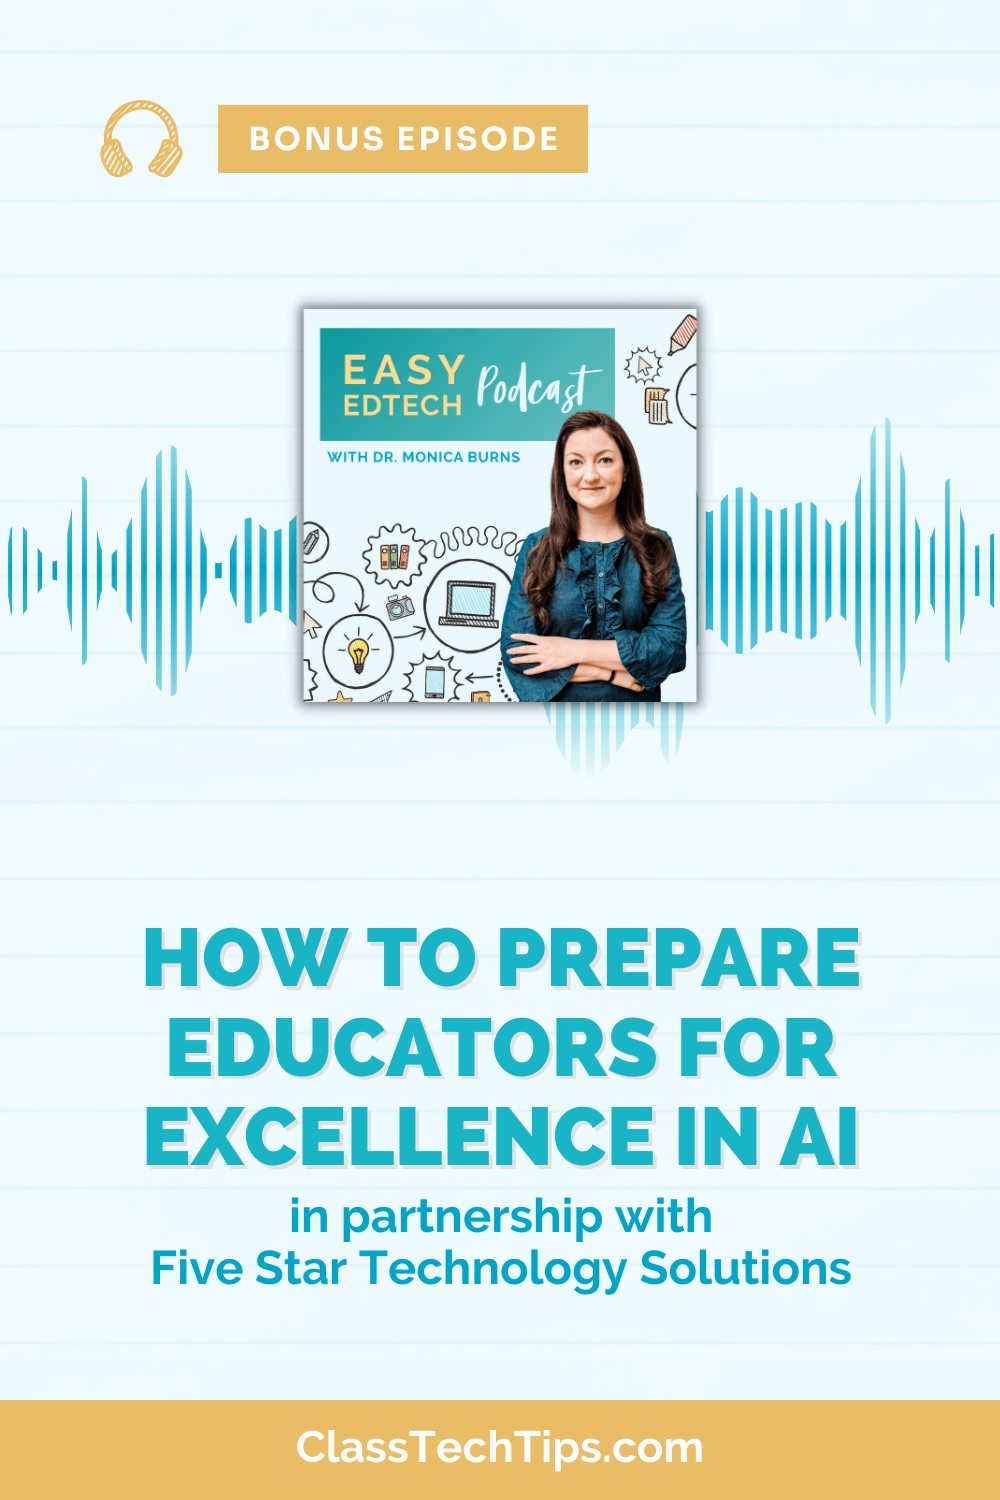 Graphic for an Easy EdTech Podcast bonus episode with the headline "HOW TO PREPARE EDUCATORS FOR EXCELLENCE IN AI" on a white background with blue and gold accents. A photo of the host, Dr. Monica Burns, appears beside the title, along with the website ClassTechTips.com and a nod to the collaboration with Five Star Technology Solutions. Audio waves and a podcast icon overlay the image to signify the podcast's digital format.